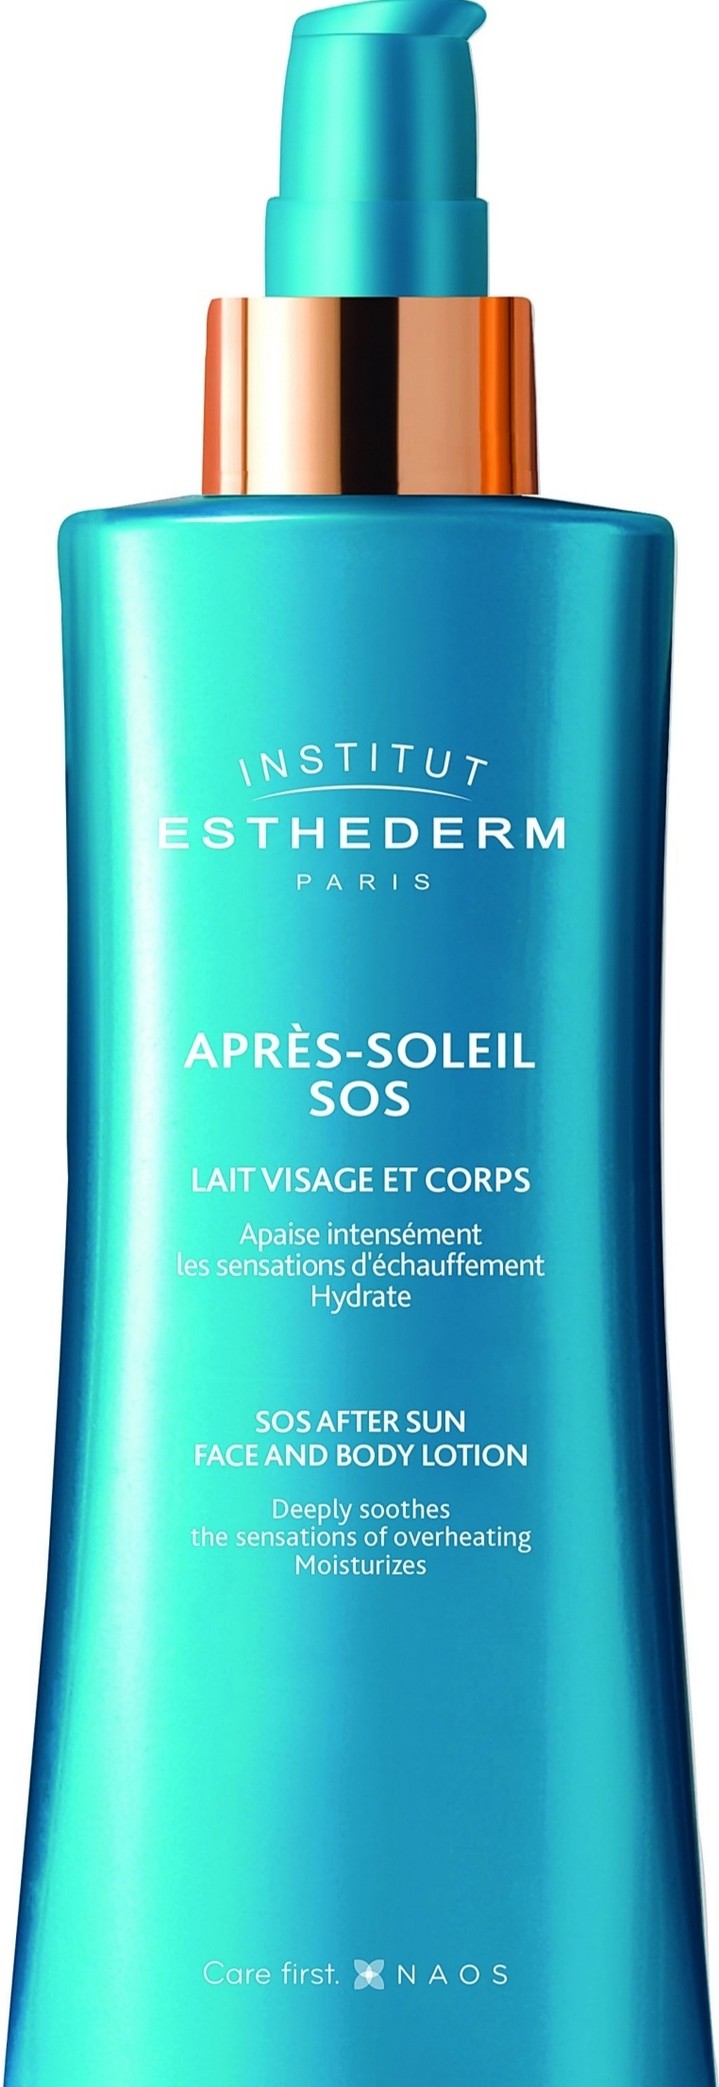 Institut Esthederm SOS After Sun Face and Body Lotion, 5538 руб.